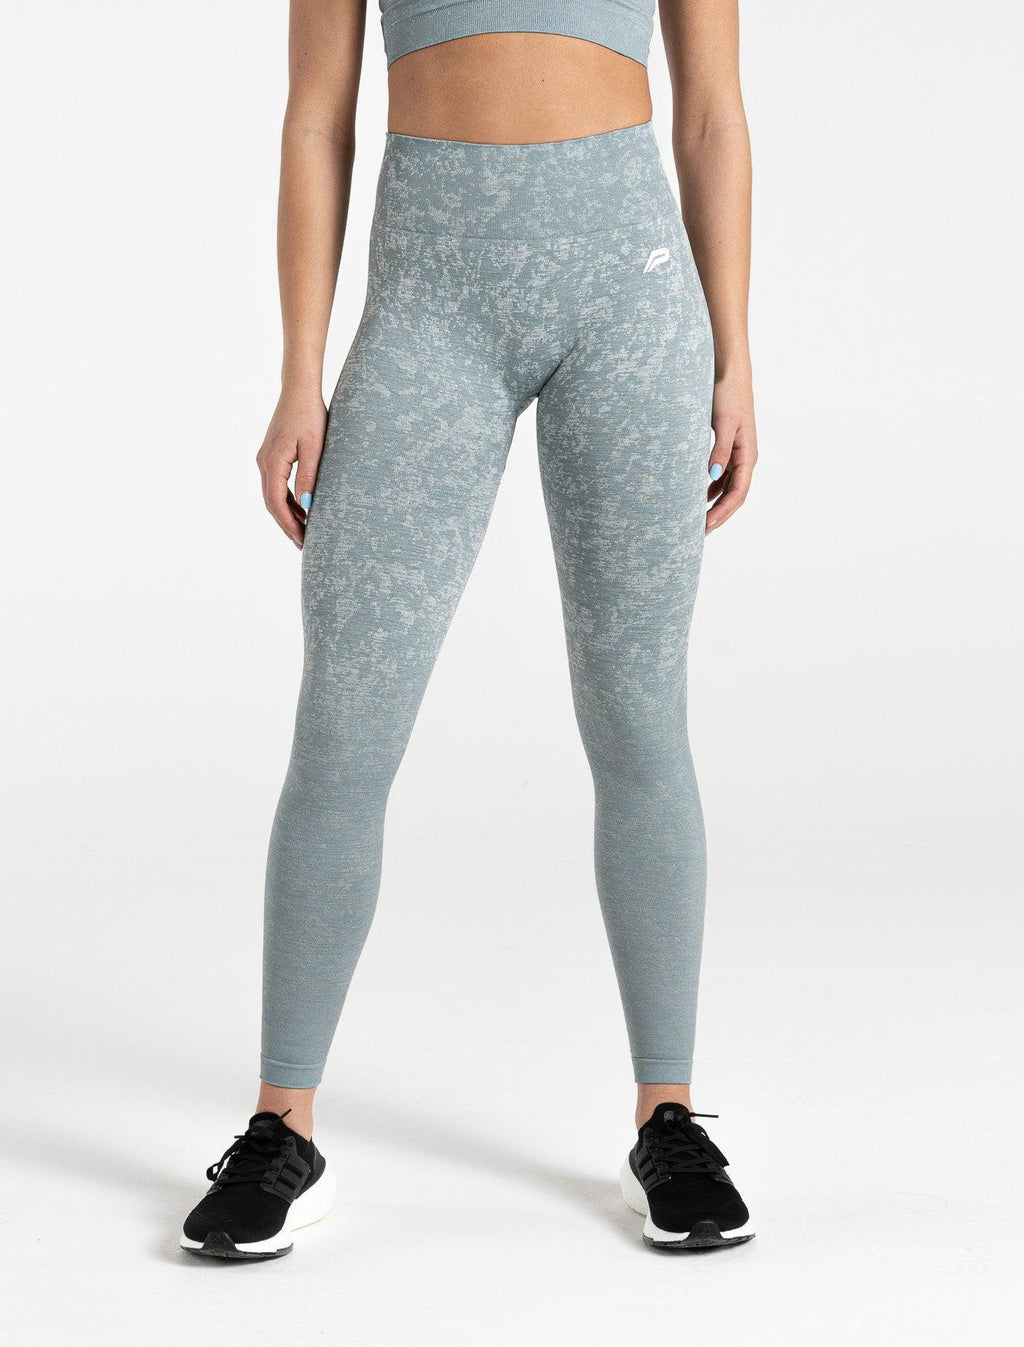 products/womens-cosmic-seamless-leggings-teal-ombre.jpg